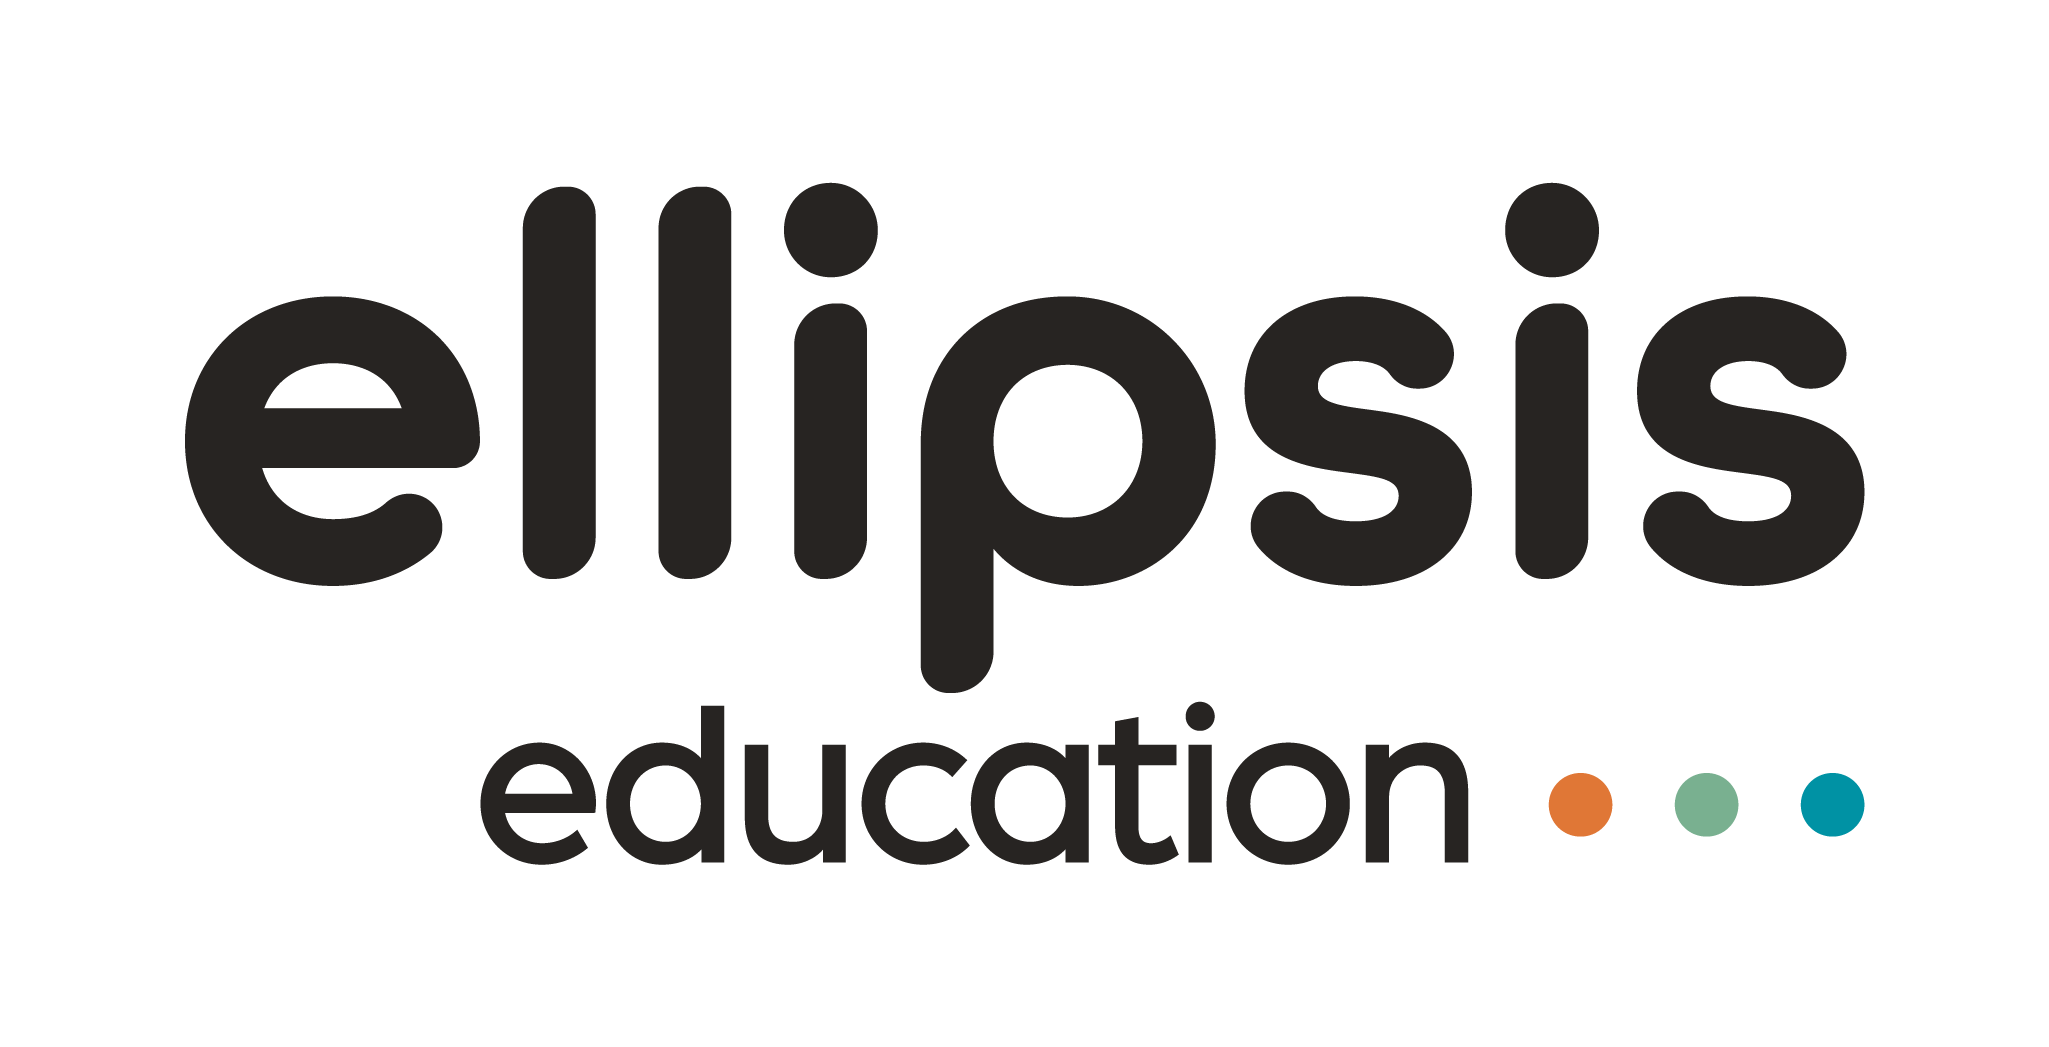 Ellipsis Education (formerly Codelicious)